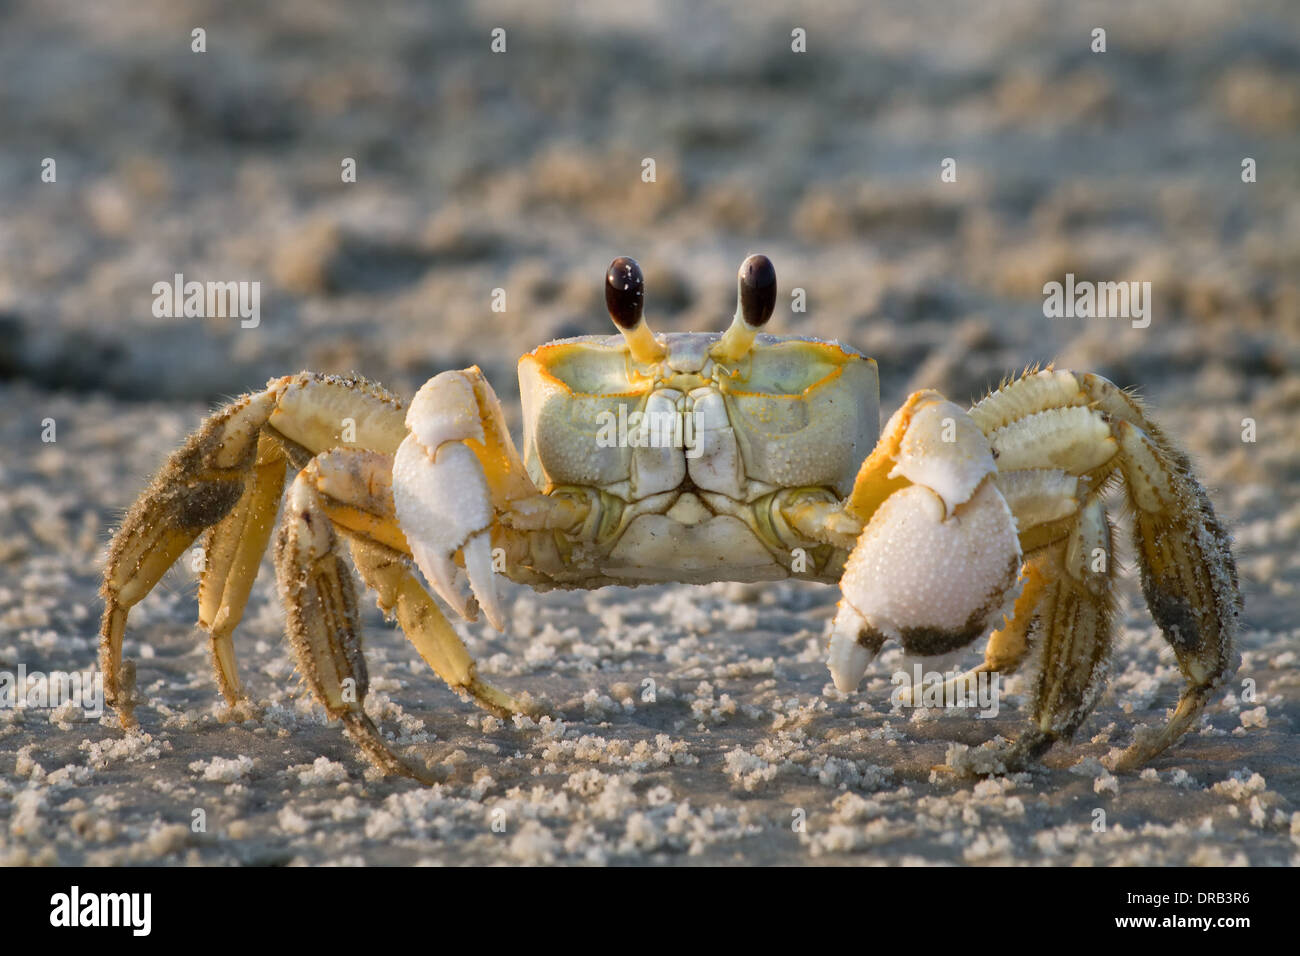 A close-up view of an Atlantic Ghost Crab (Ocypode quadrataon) on the beach. Stock Photo